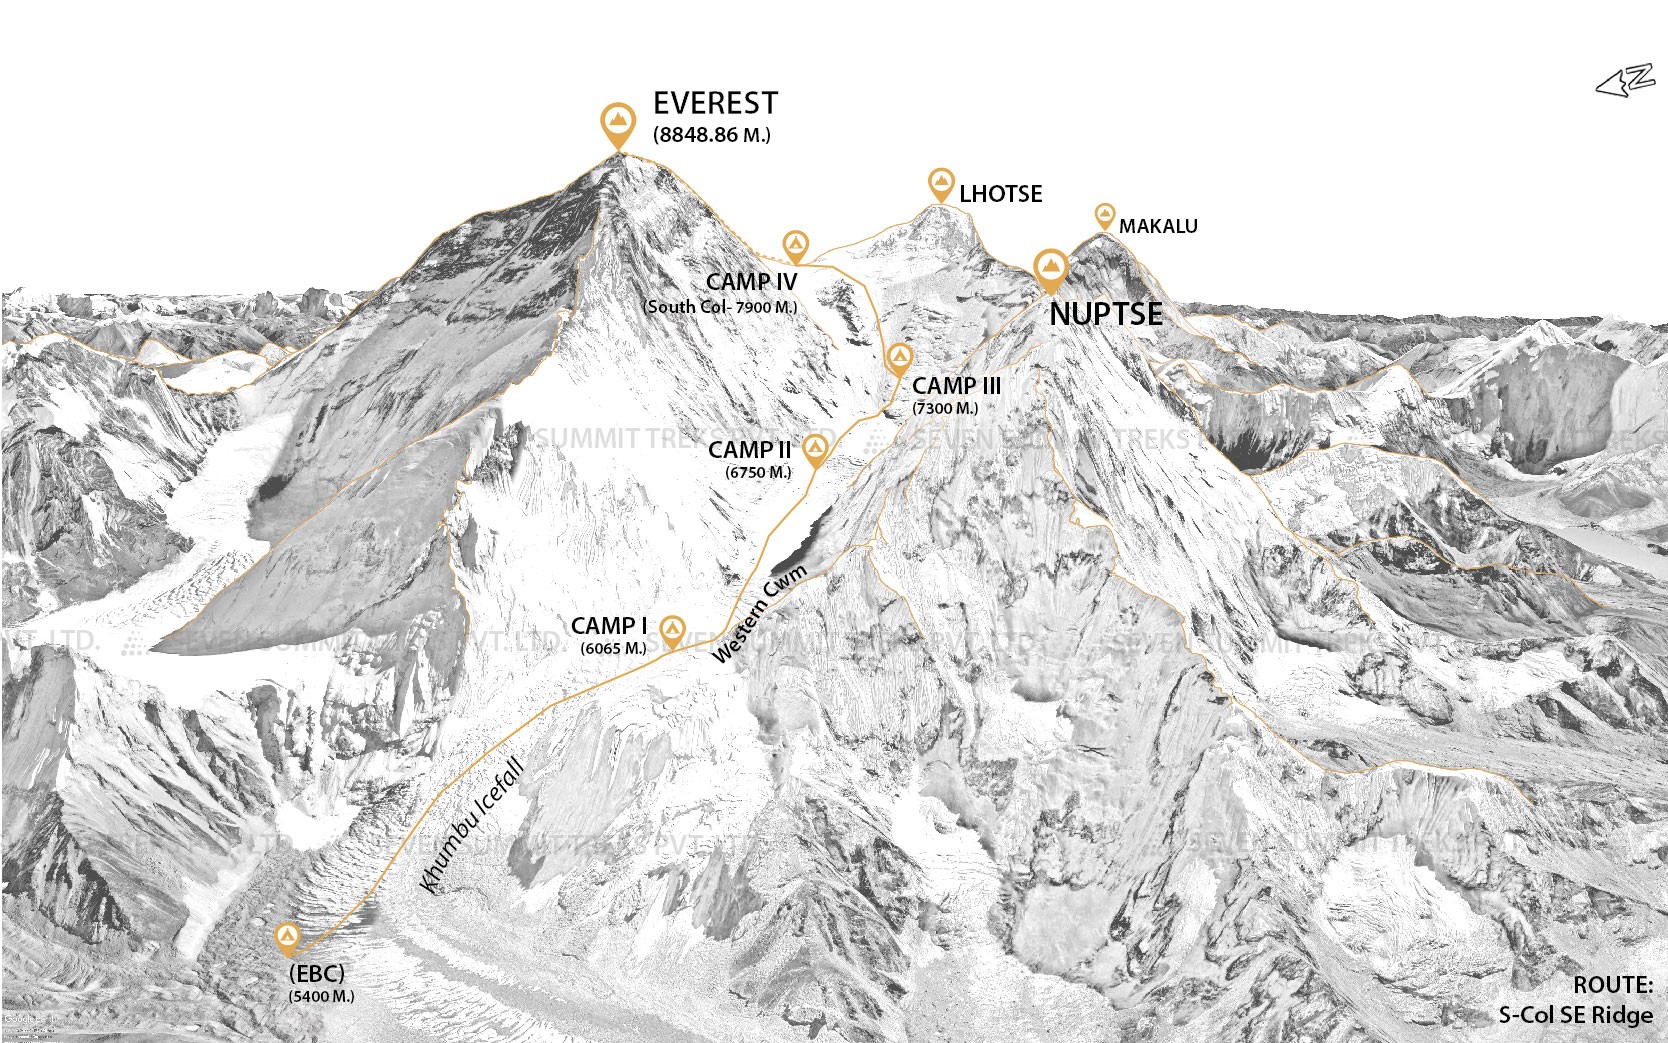 MT. EVEREST EXPEDITION (8848.86M)- SOUTH